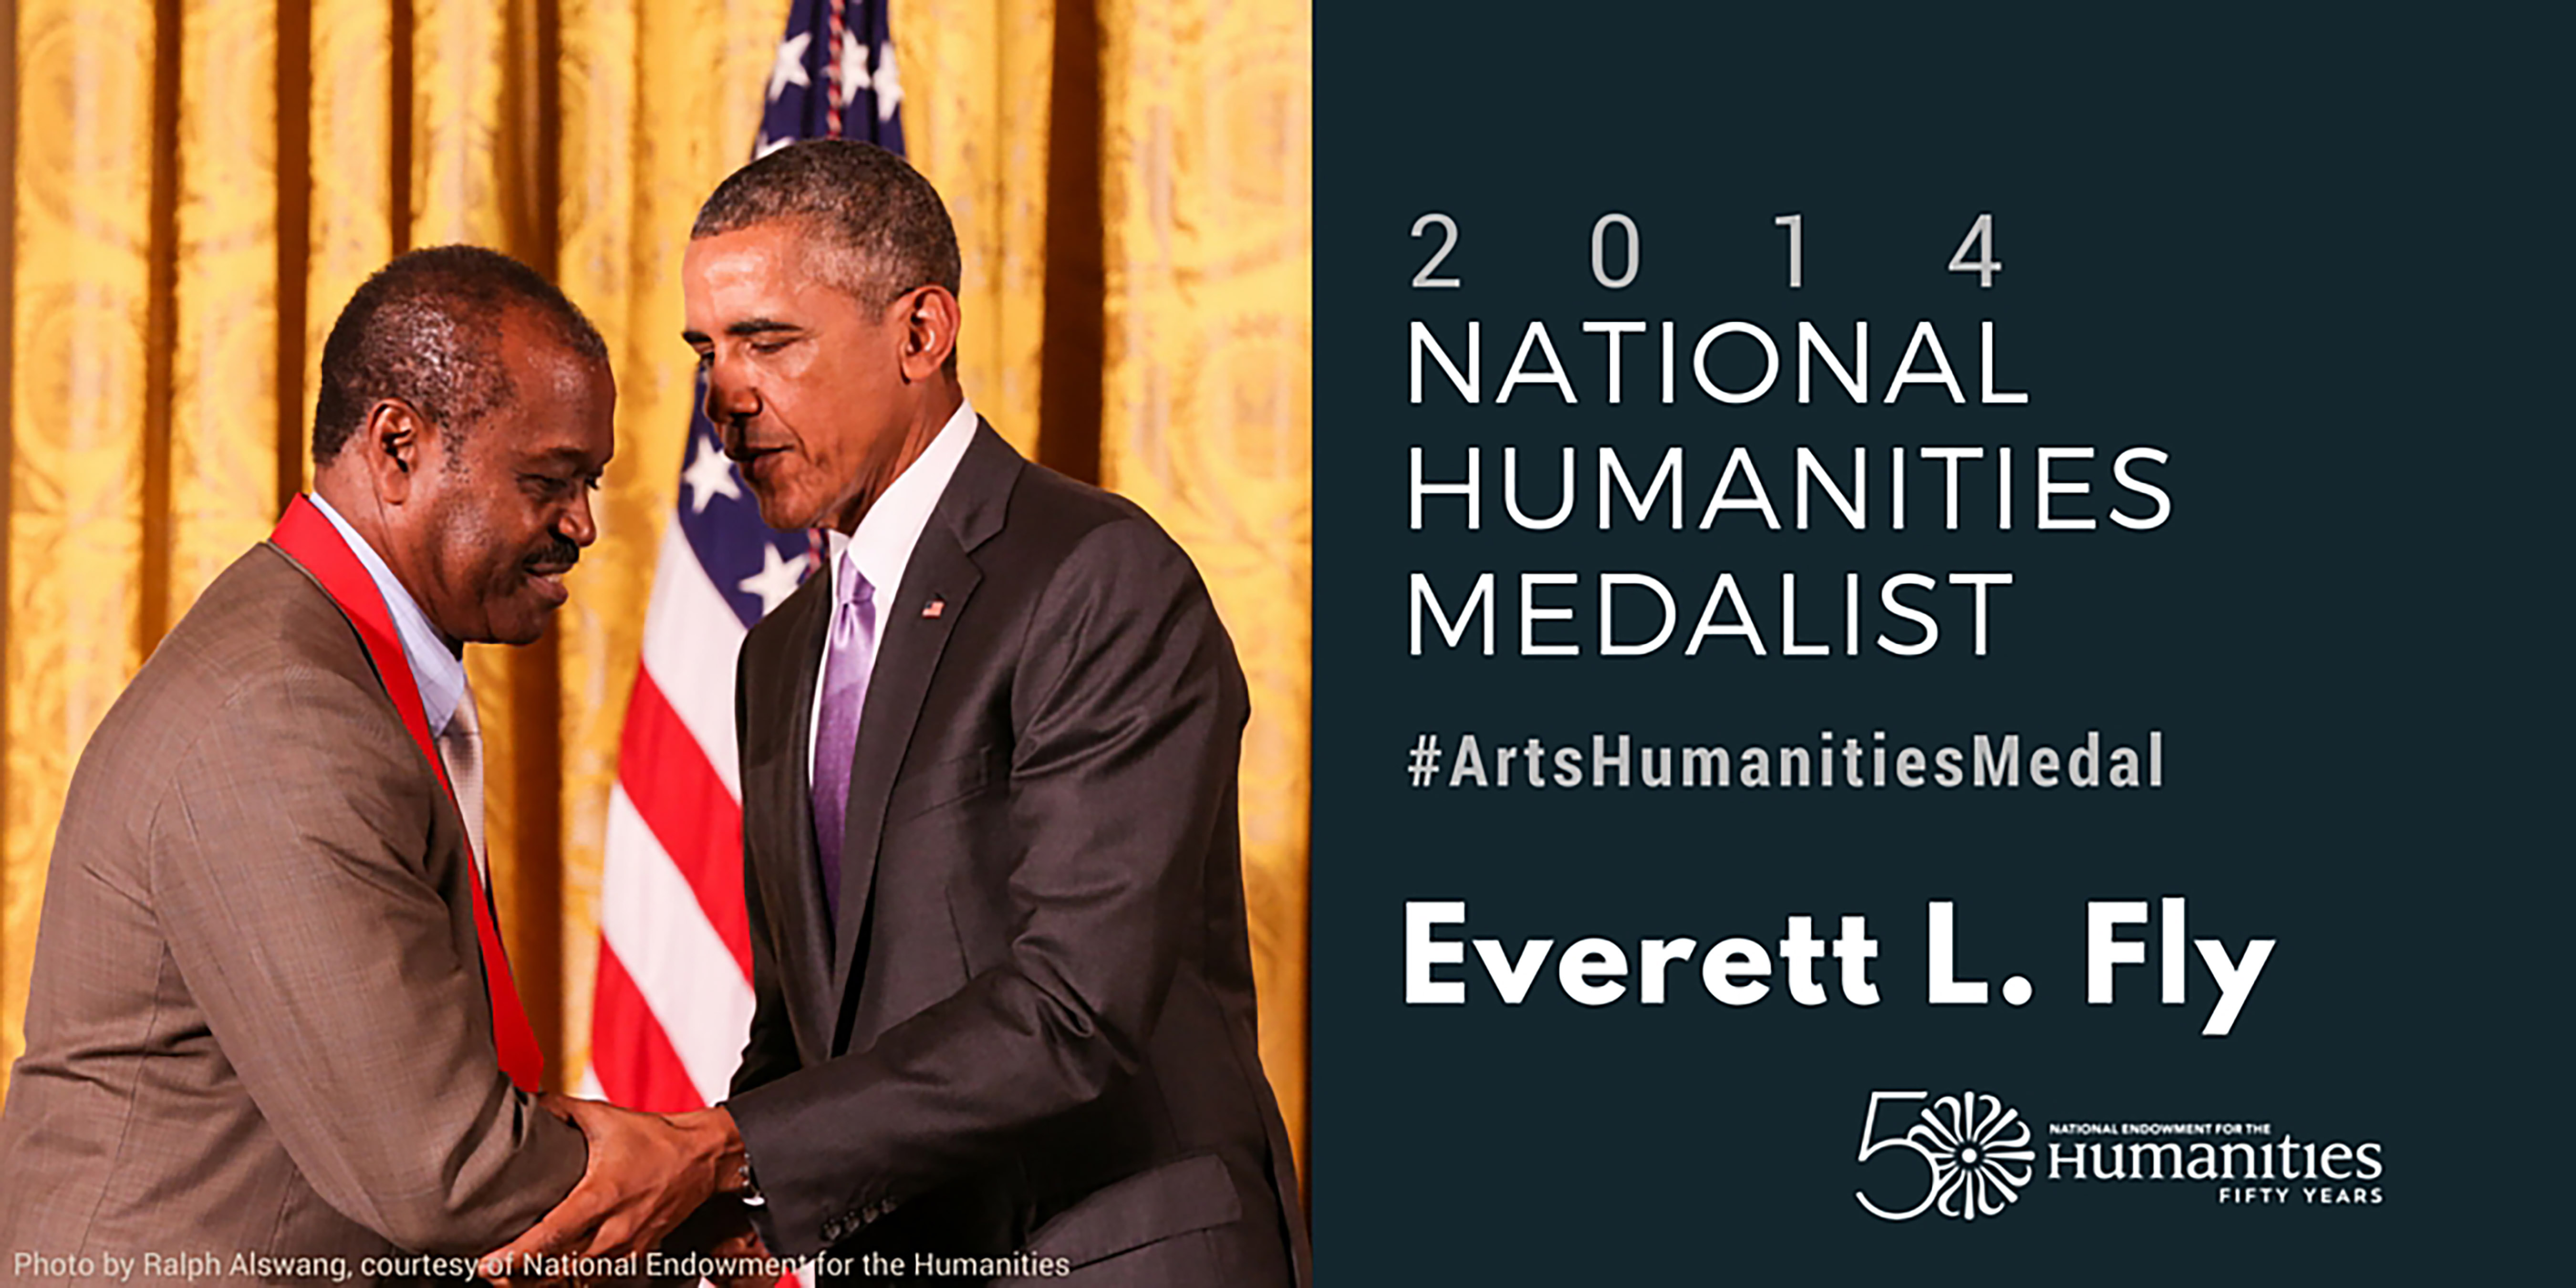 Everett Fly receiving the National Humanities Award in 2014